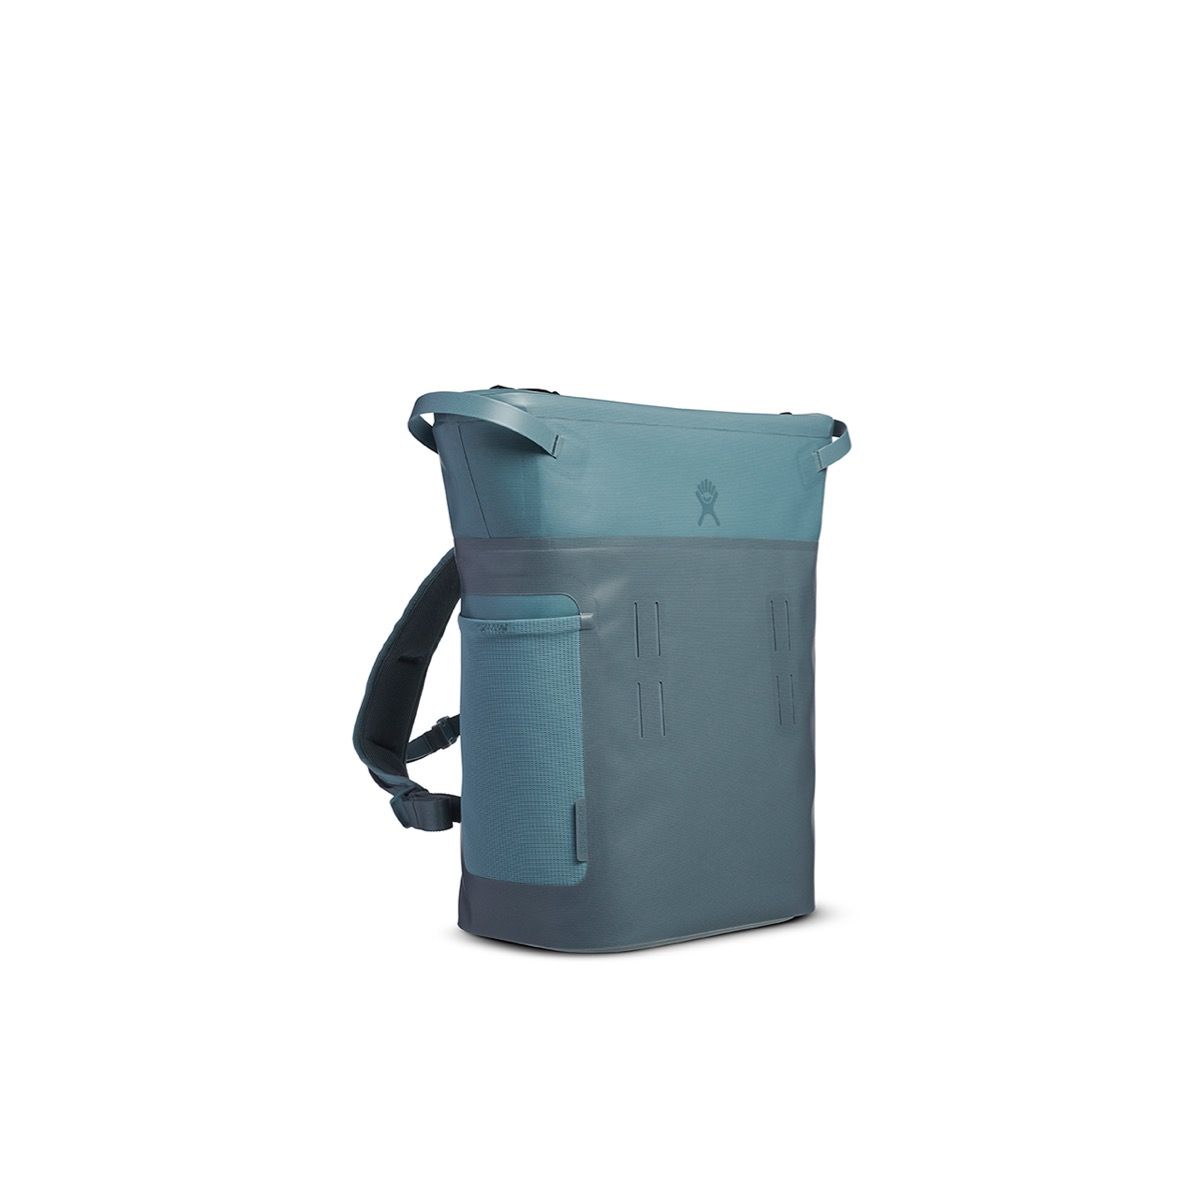 Hydro Flask 20L Day Escape Soft Cooler Pack – Wilderness Sports, Inc.